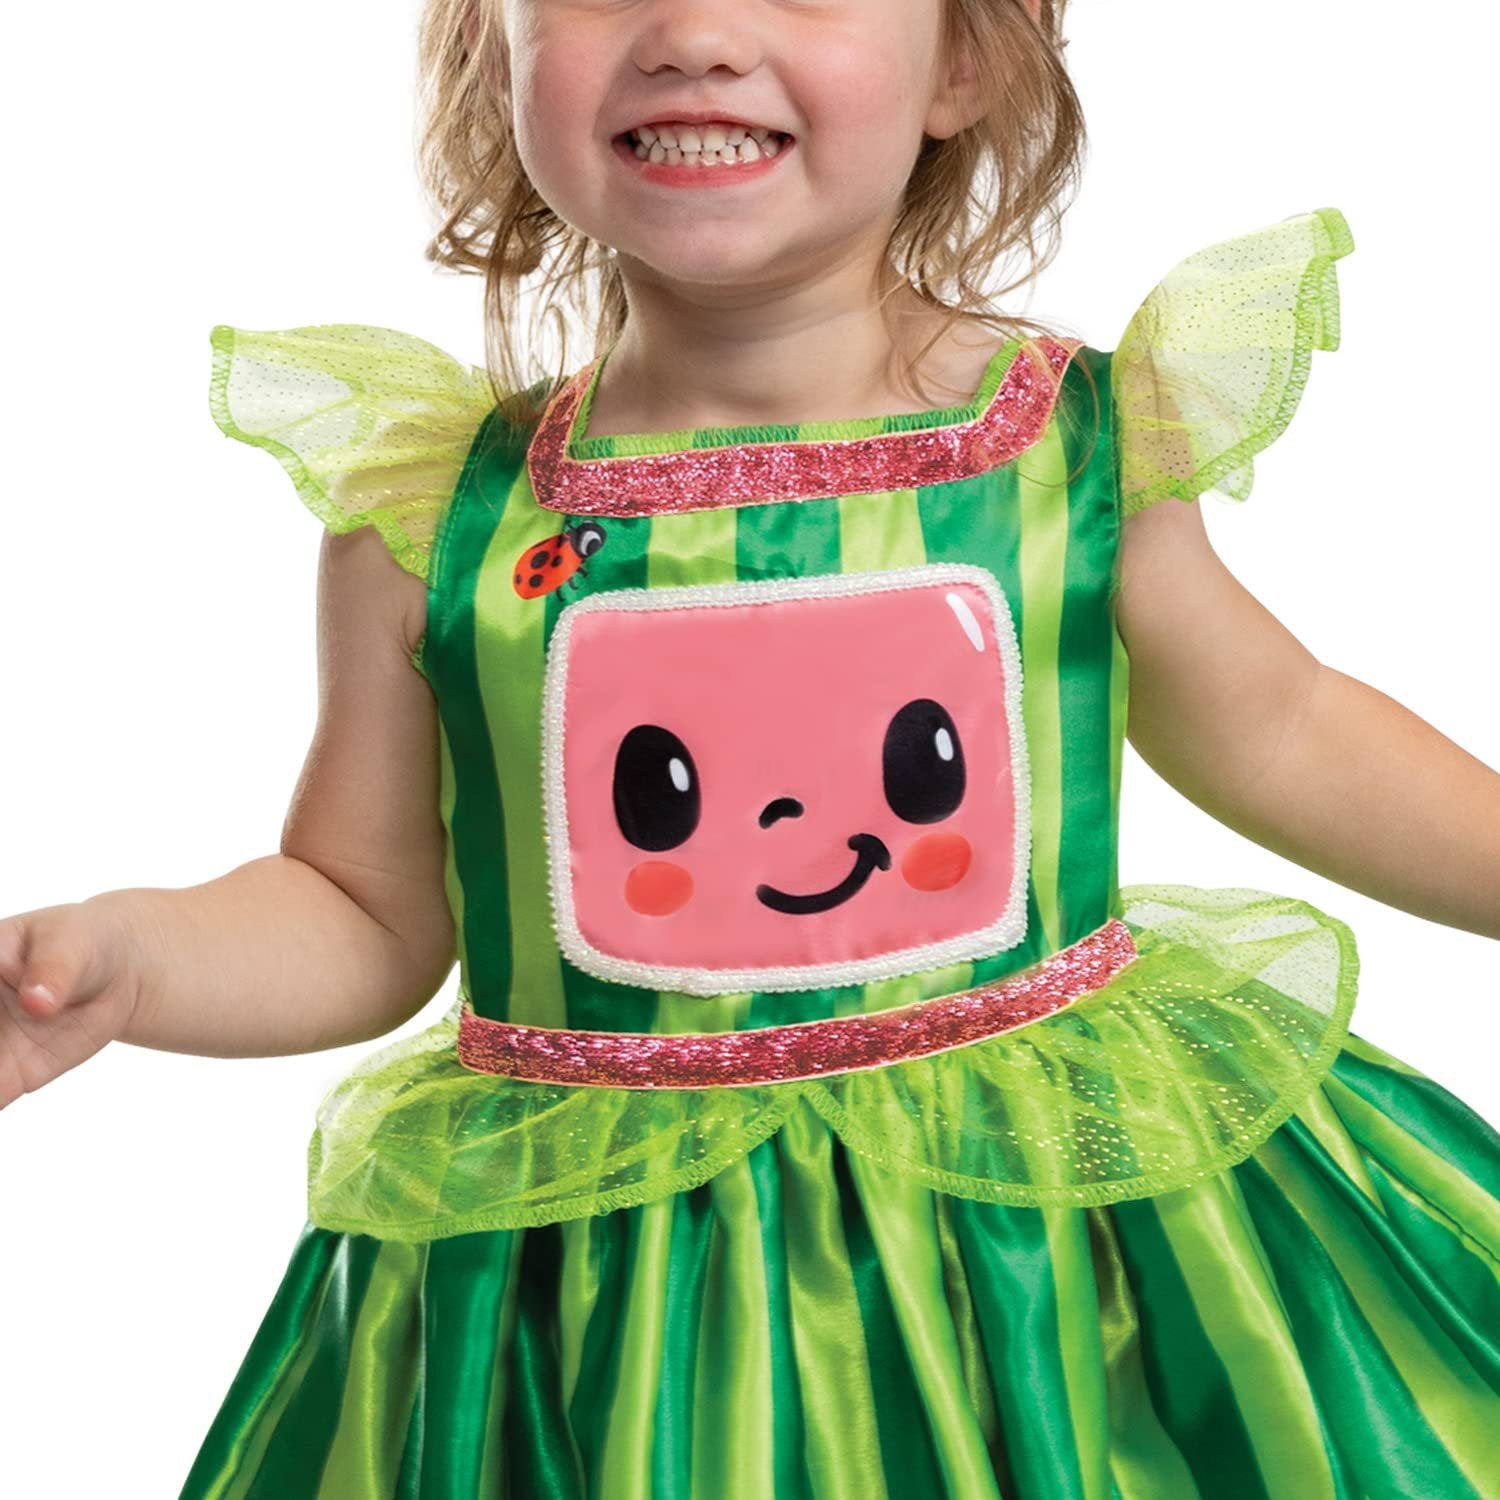 Disguise Cocomelon Toddler Dress, Official Cocomelon Costume Tutu Outfit for Kids, Toddler Size (2T)